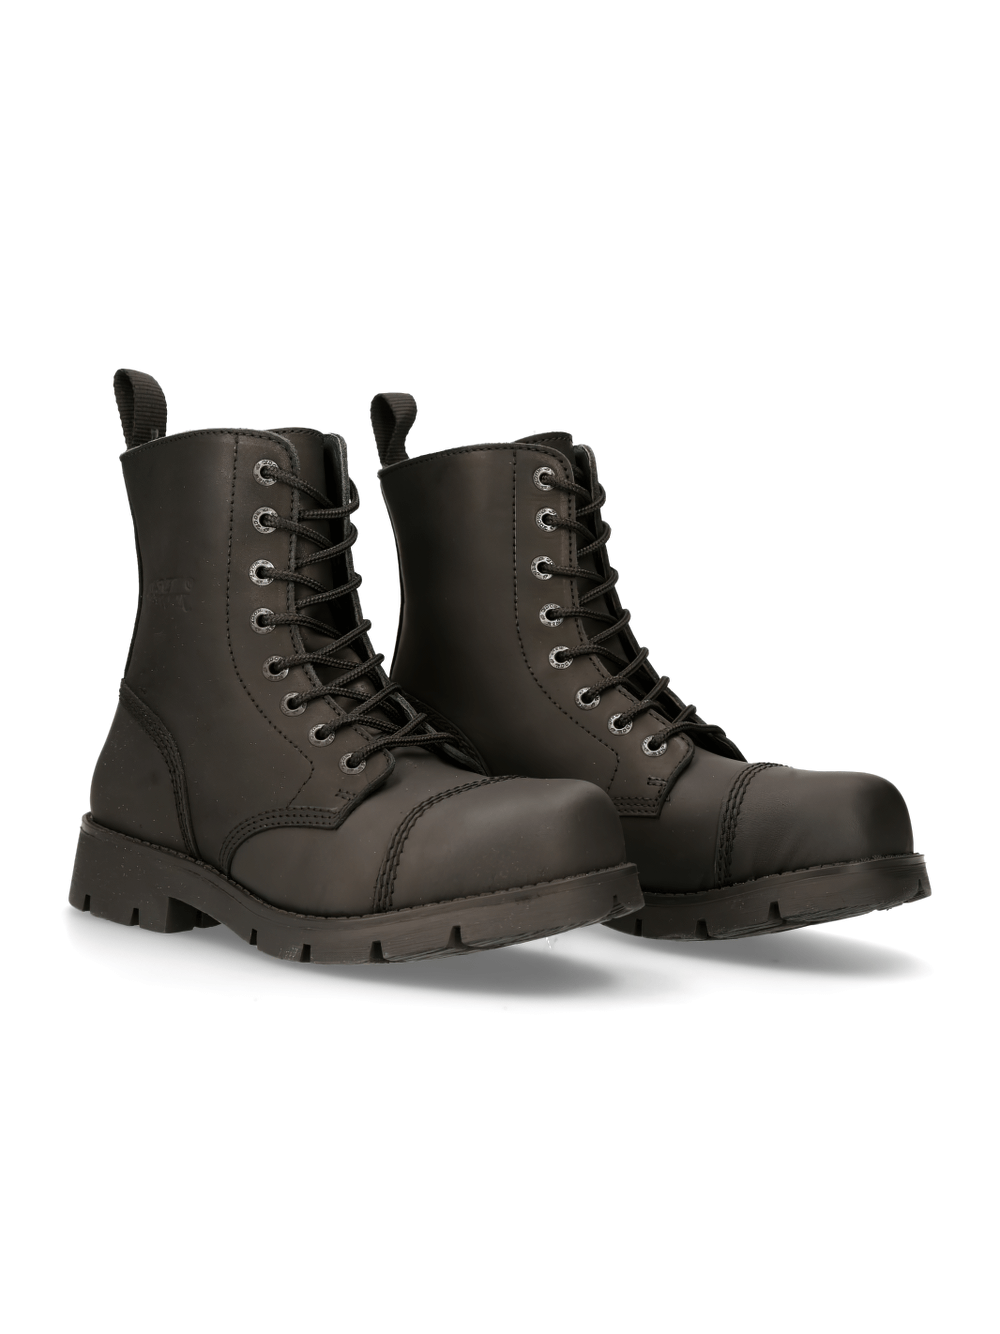 NEW ROCK Rugged Lace-Up Black Tactical Leather Boots